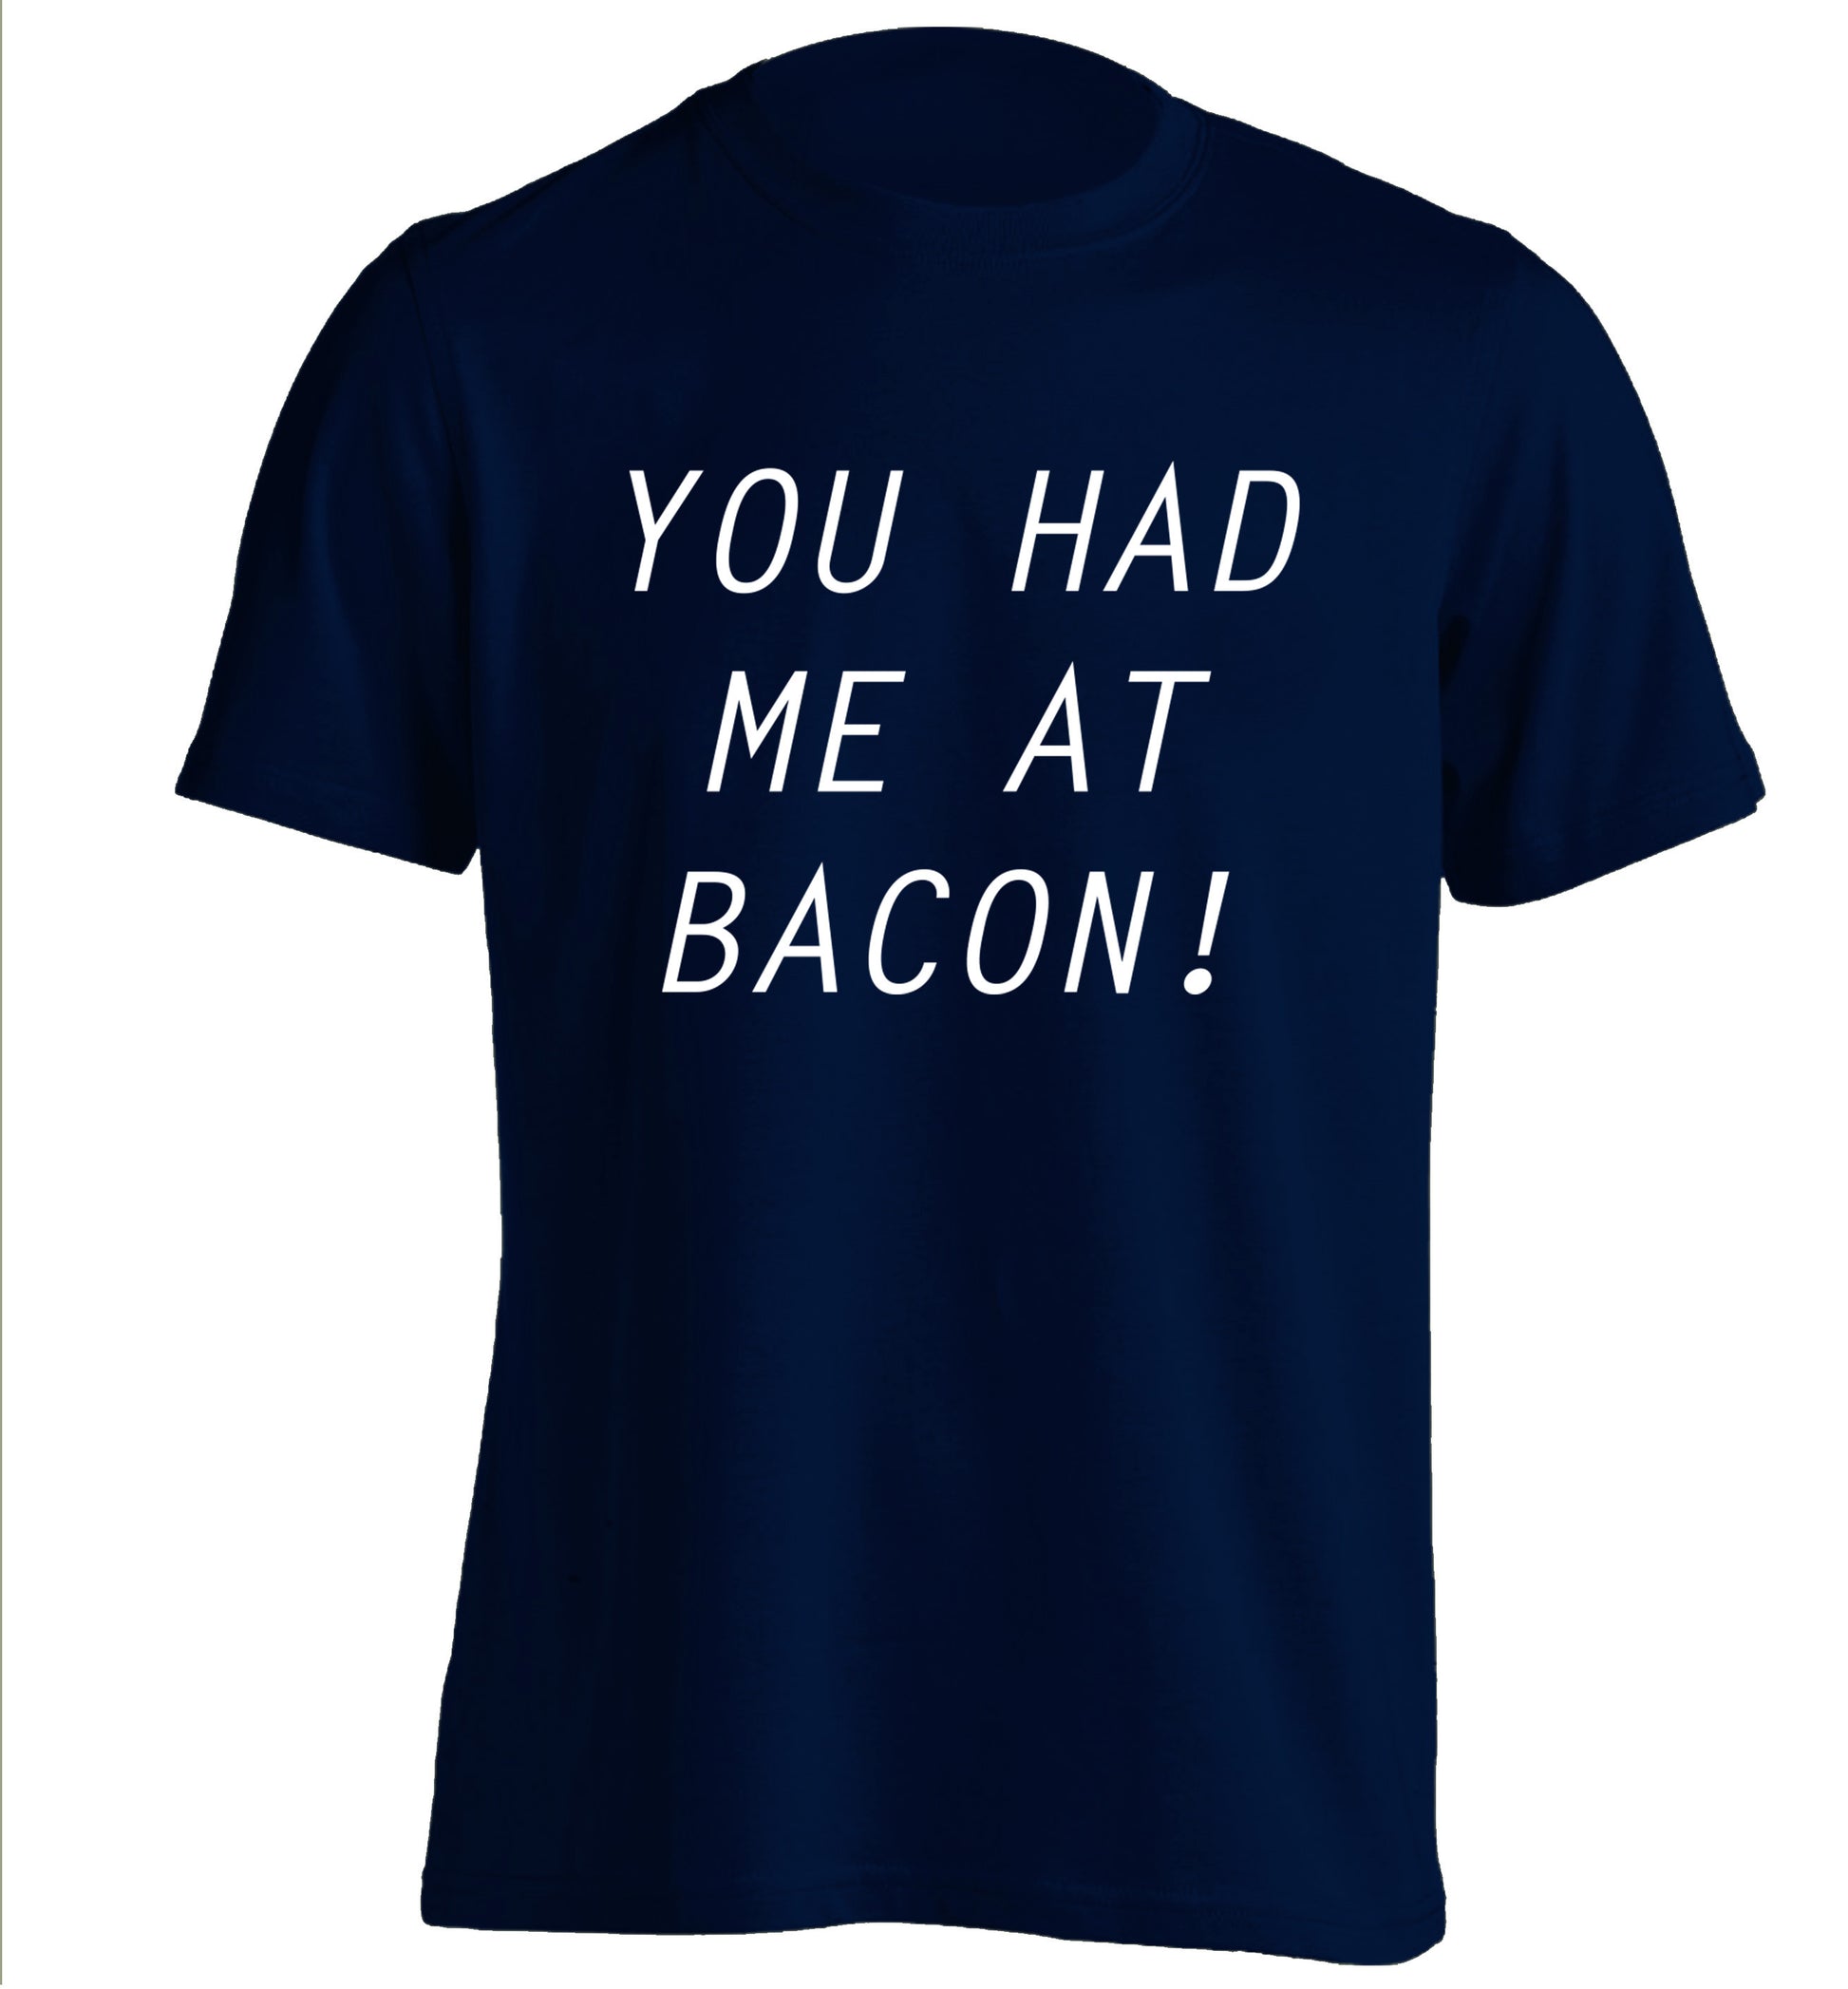 You had me at bacon adults unisex navy Tshirt 2XL